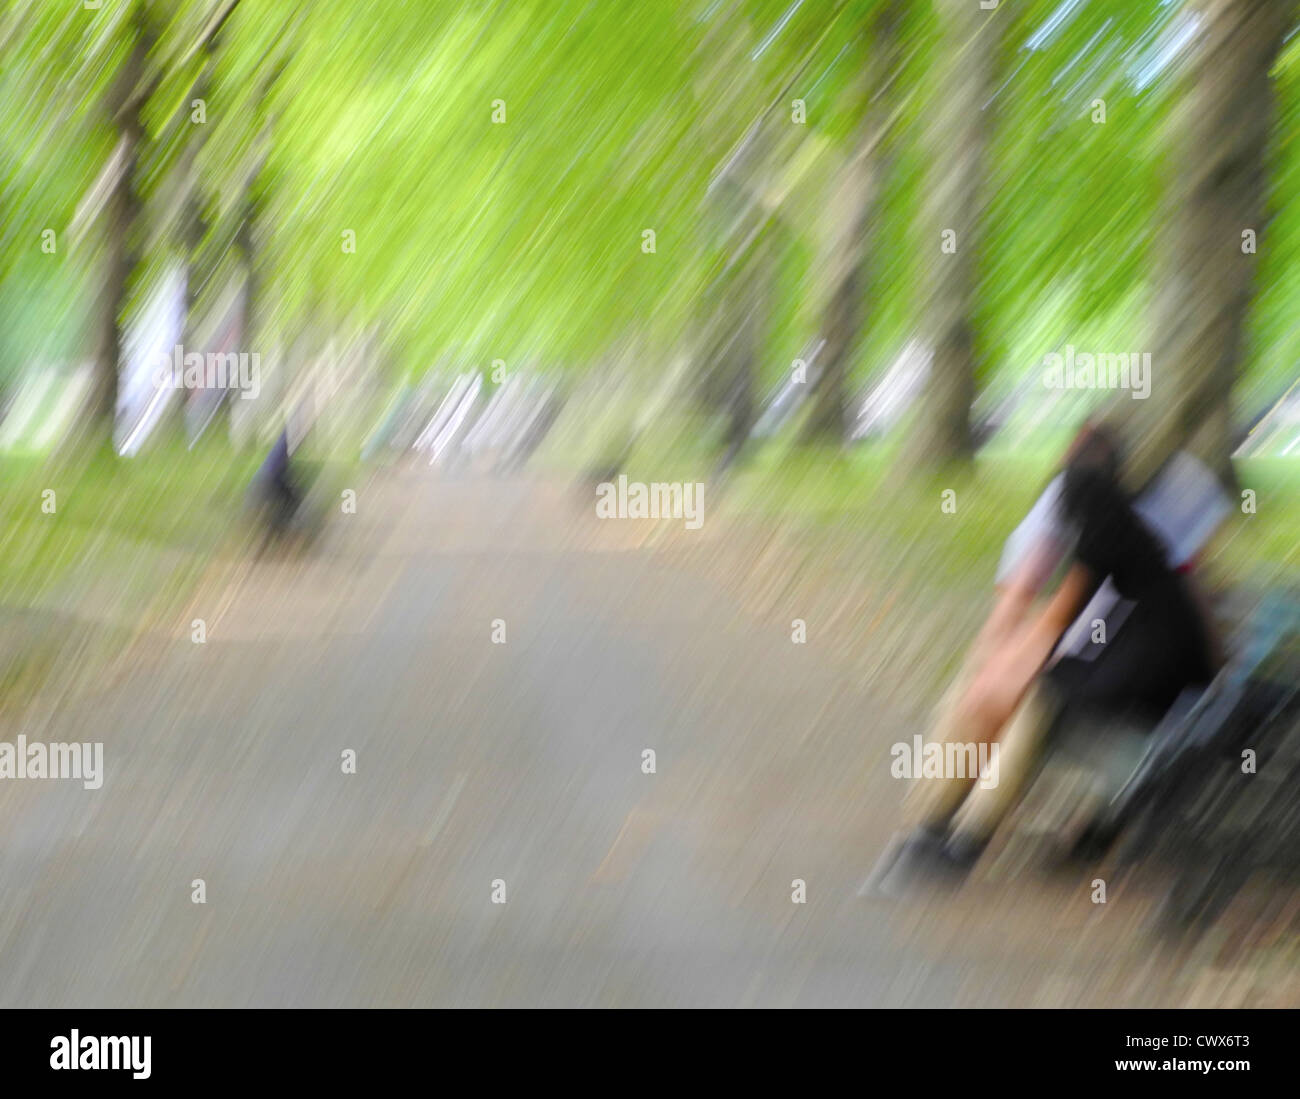 Unidentifiable young lovers on a park bench in Spring - IMAGE MANIPULATED TO REMOVE IDENTITY AND CREATE ILLUSTRATION Stock Photo